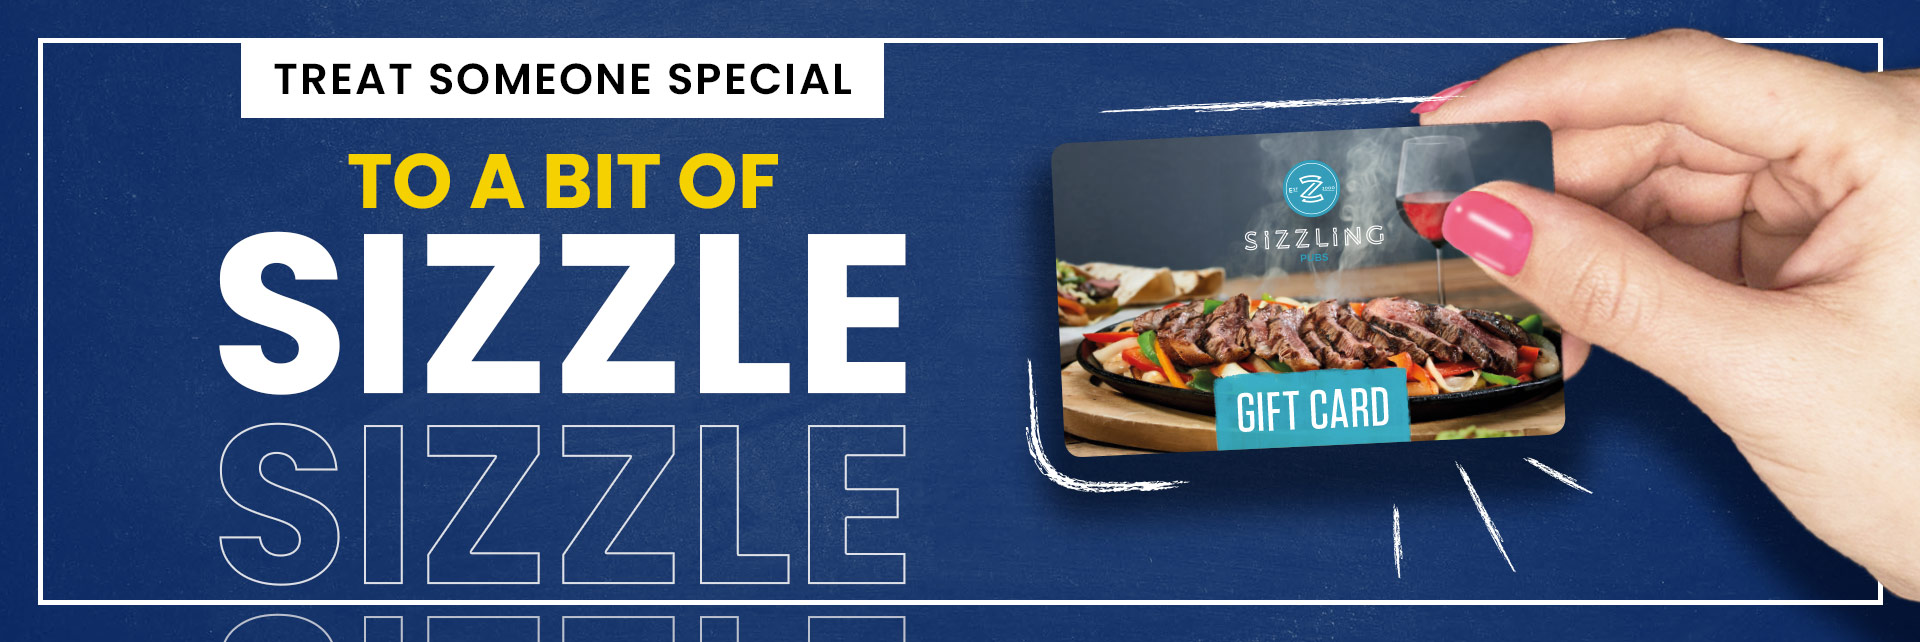 Sizzling Pubs Gift Card at The Wulstan in Newcastle-Under-Lyme